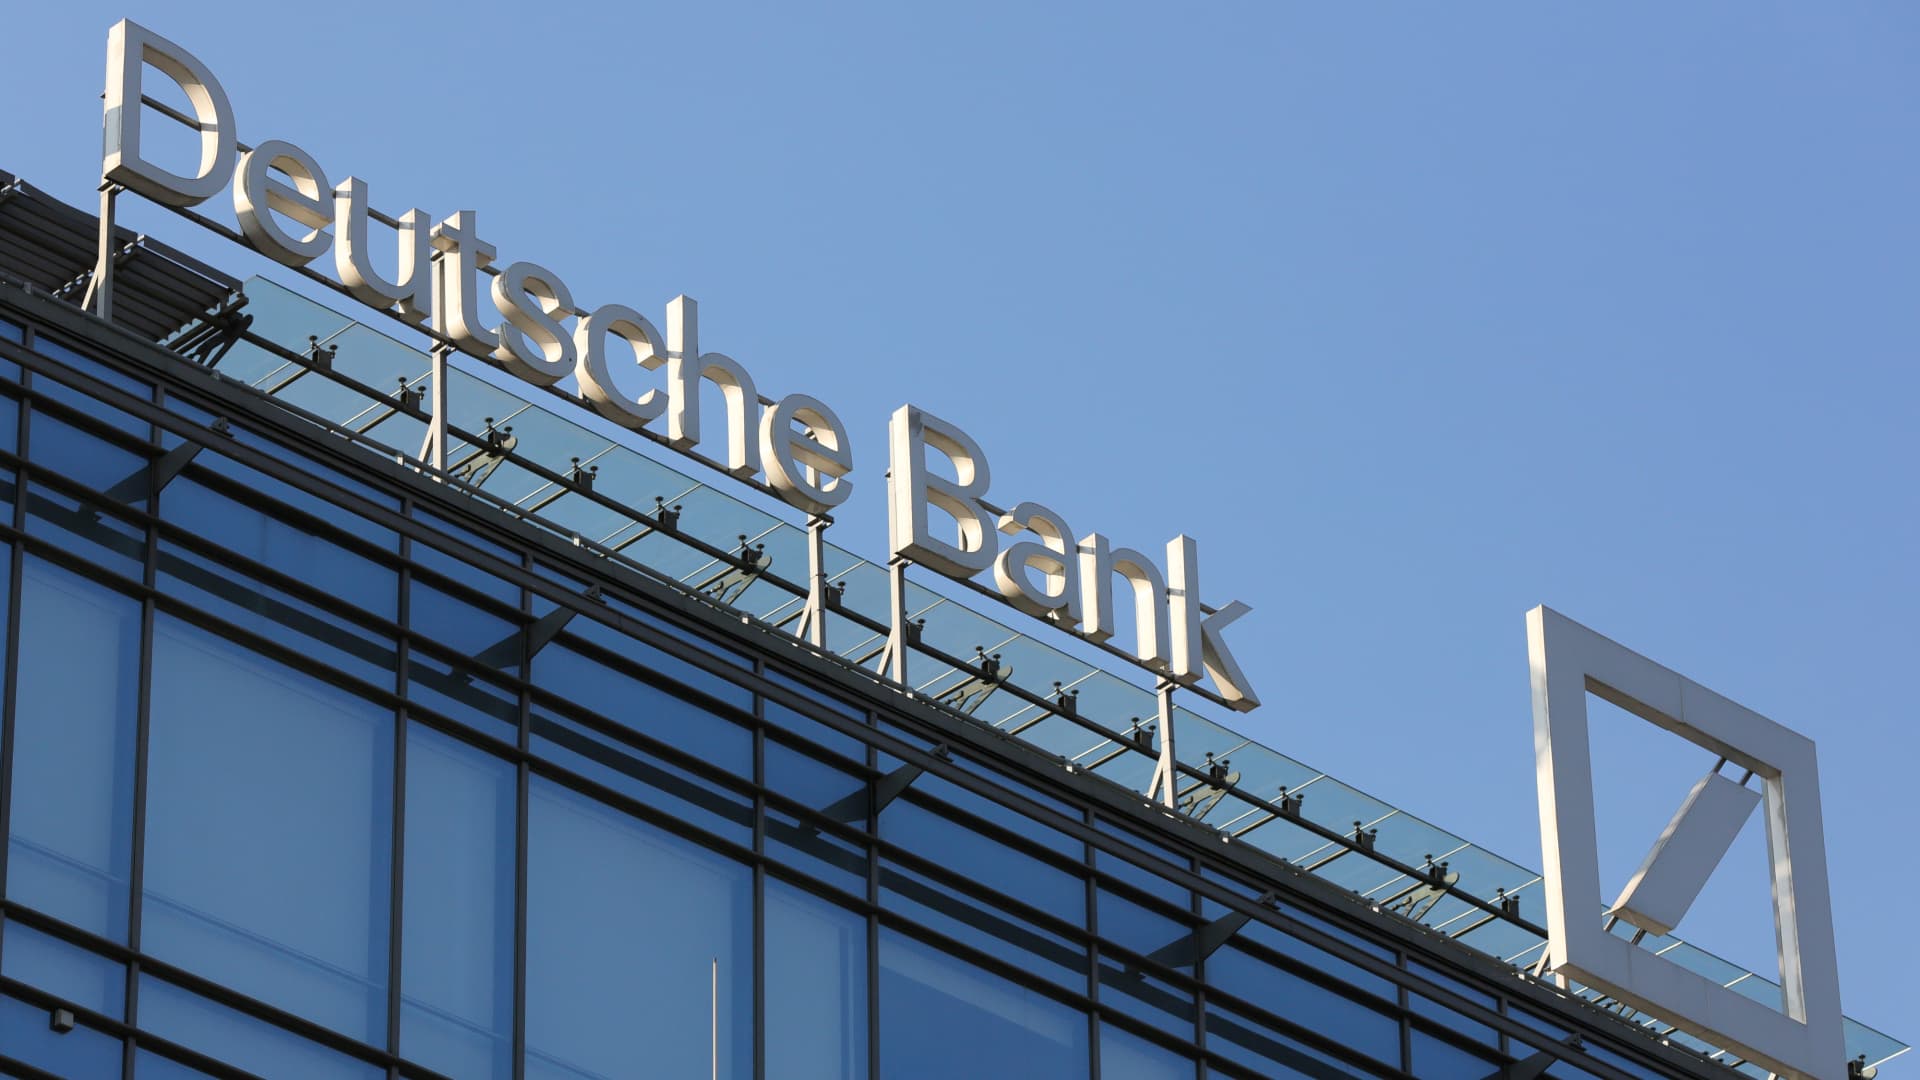 Deutsche Bank shares slide 9% after sudden spike in the cost of insuring against its default